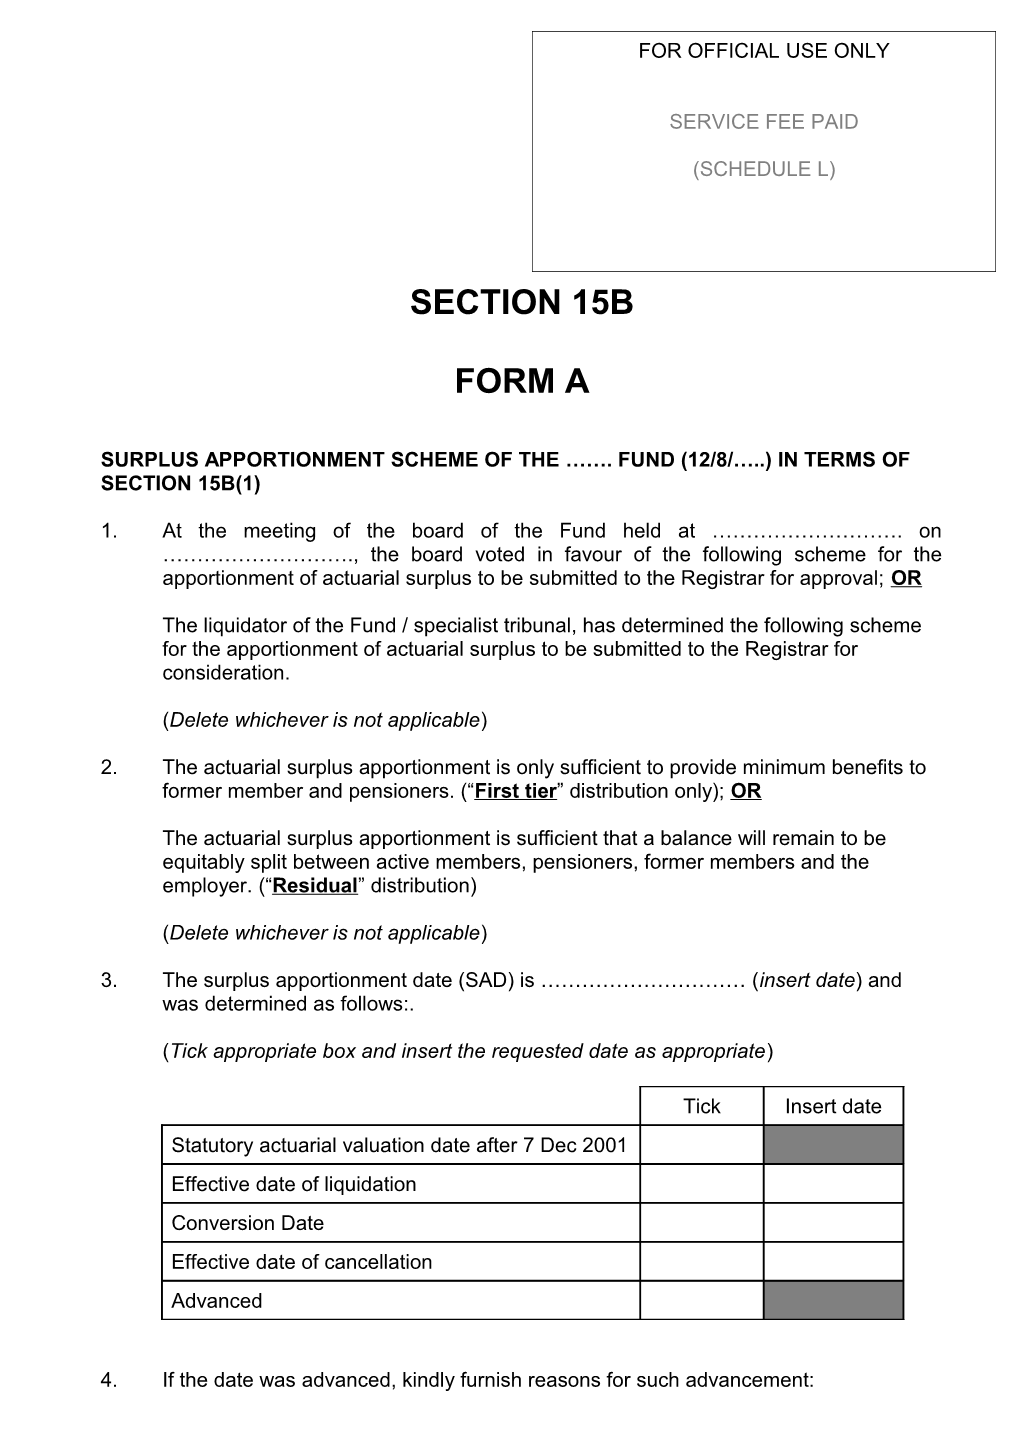 Surplus Apportionment Scheme of the . Fund (12/8/ ) in Terms of Section 15B(1)